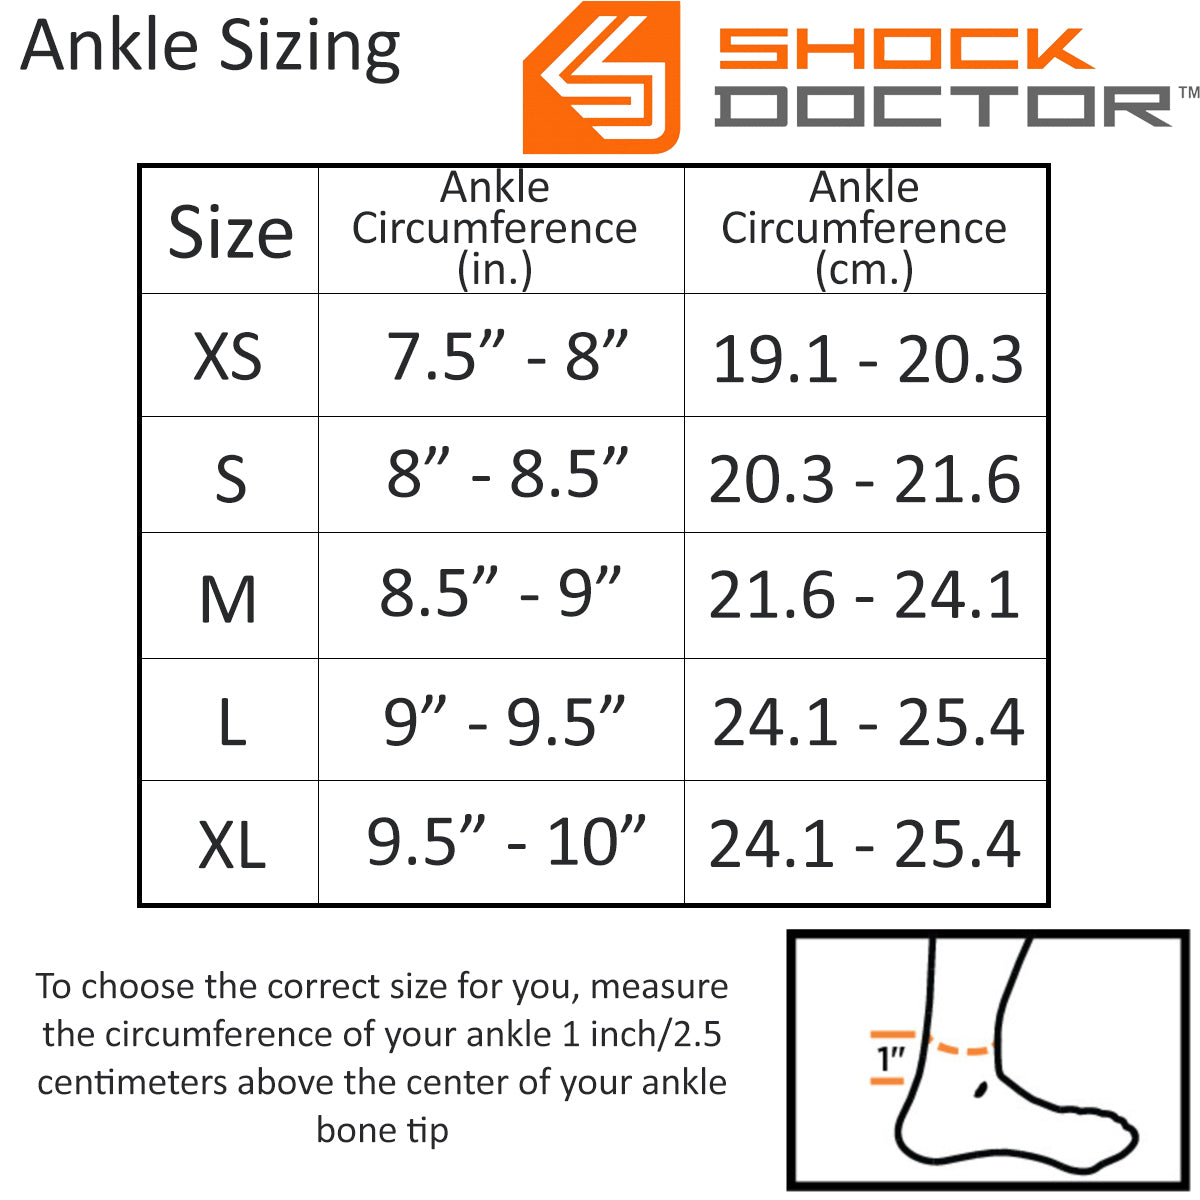 Shock Doctor Ultra Gel Lace Ankle Support - White Shock Doctor